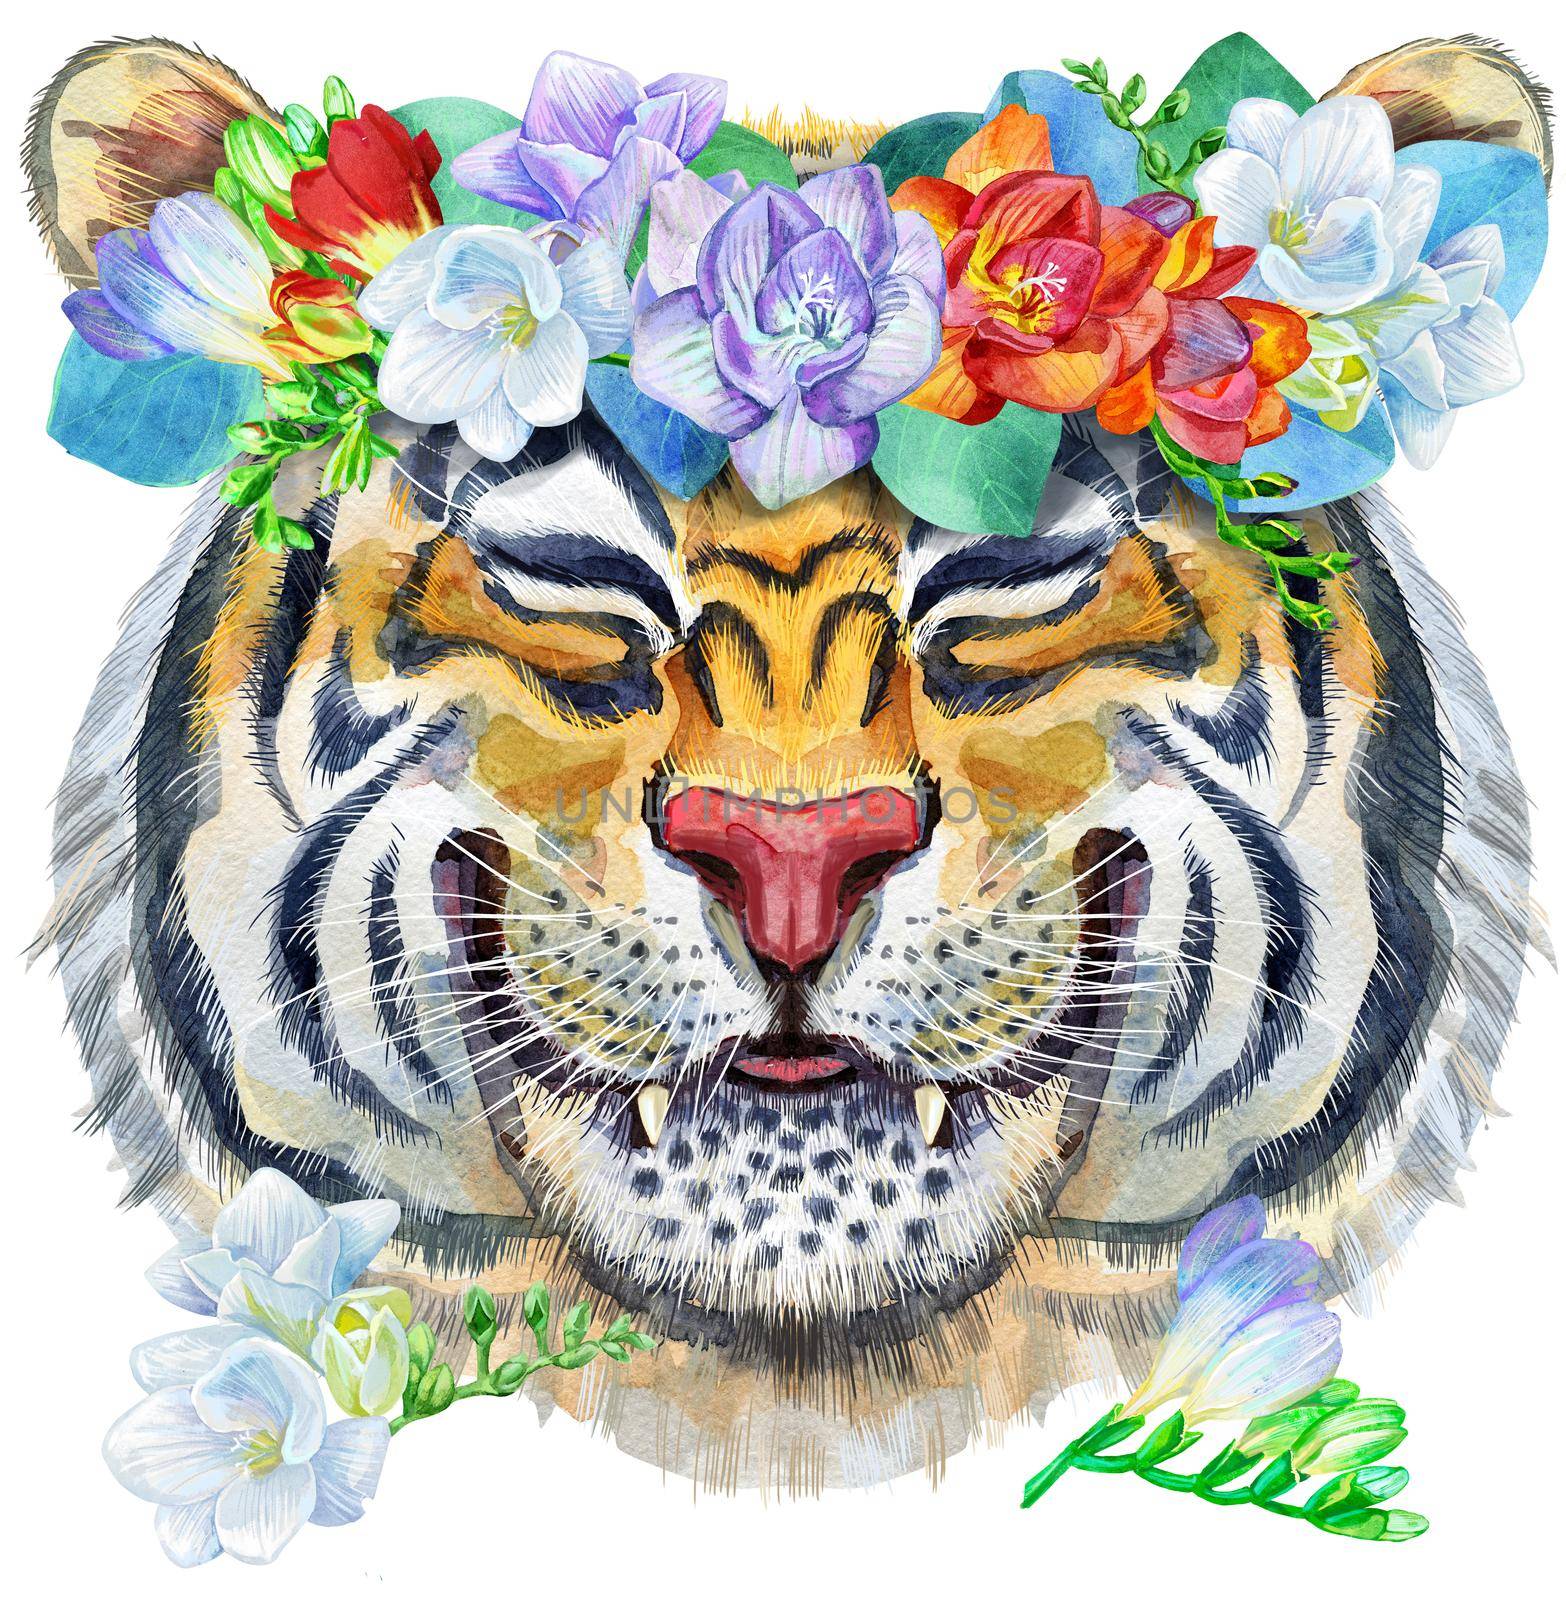 Colorful orange smiling tiger in a wreath of peonies. Wild animal watercolor illustration on white background by NataOmsk